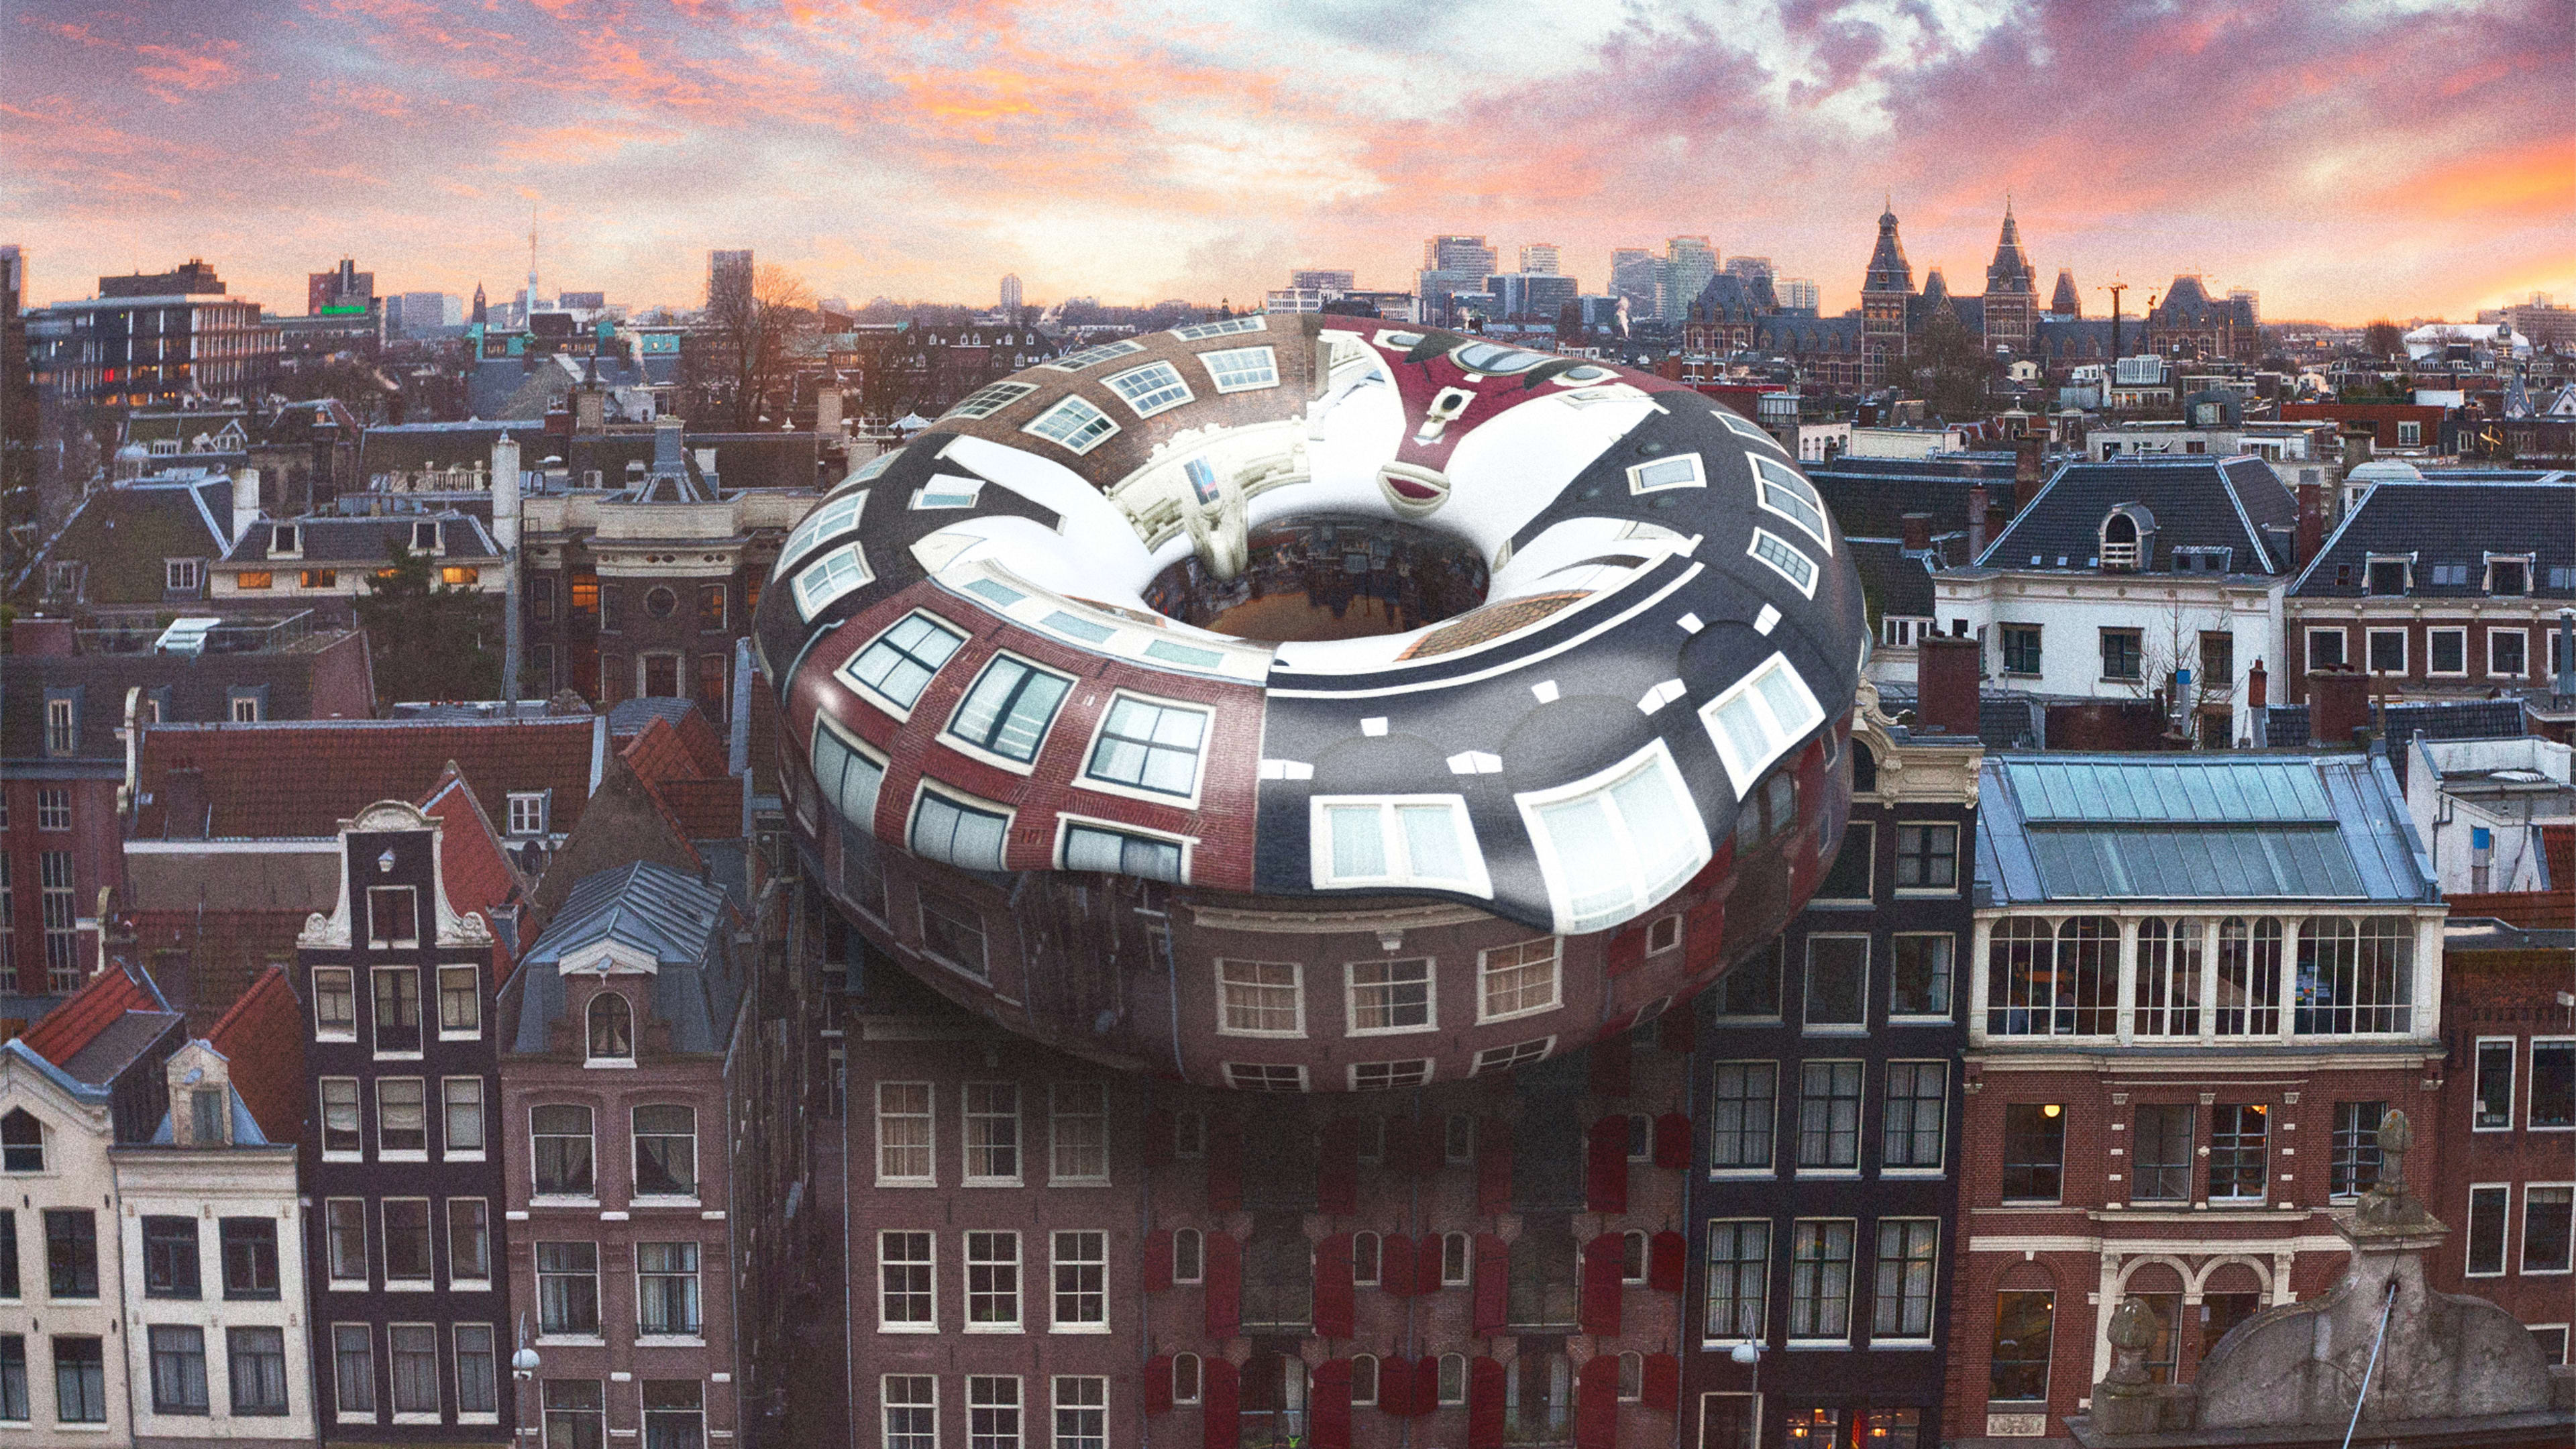 Amsterdam is now using the ‘doughnut’ model of economics: What does that mean?